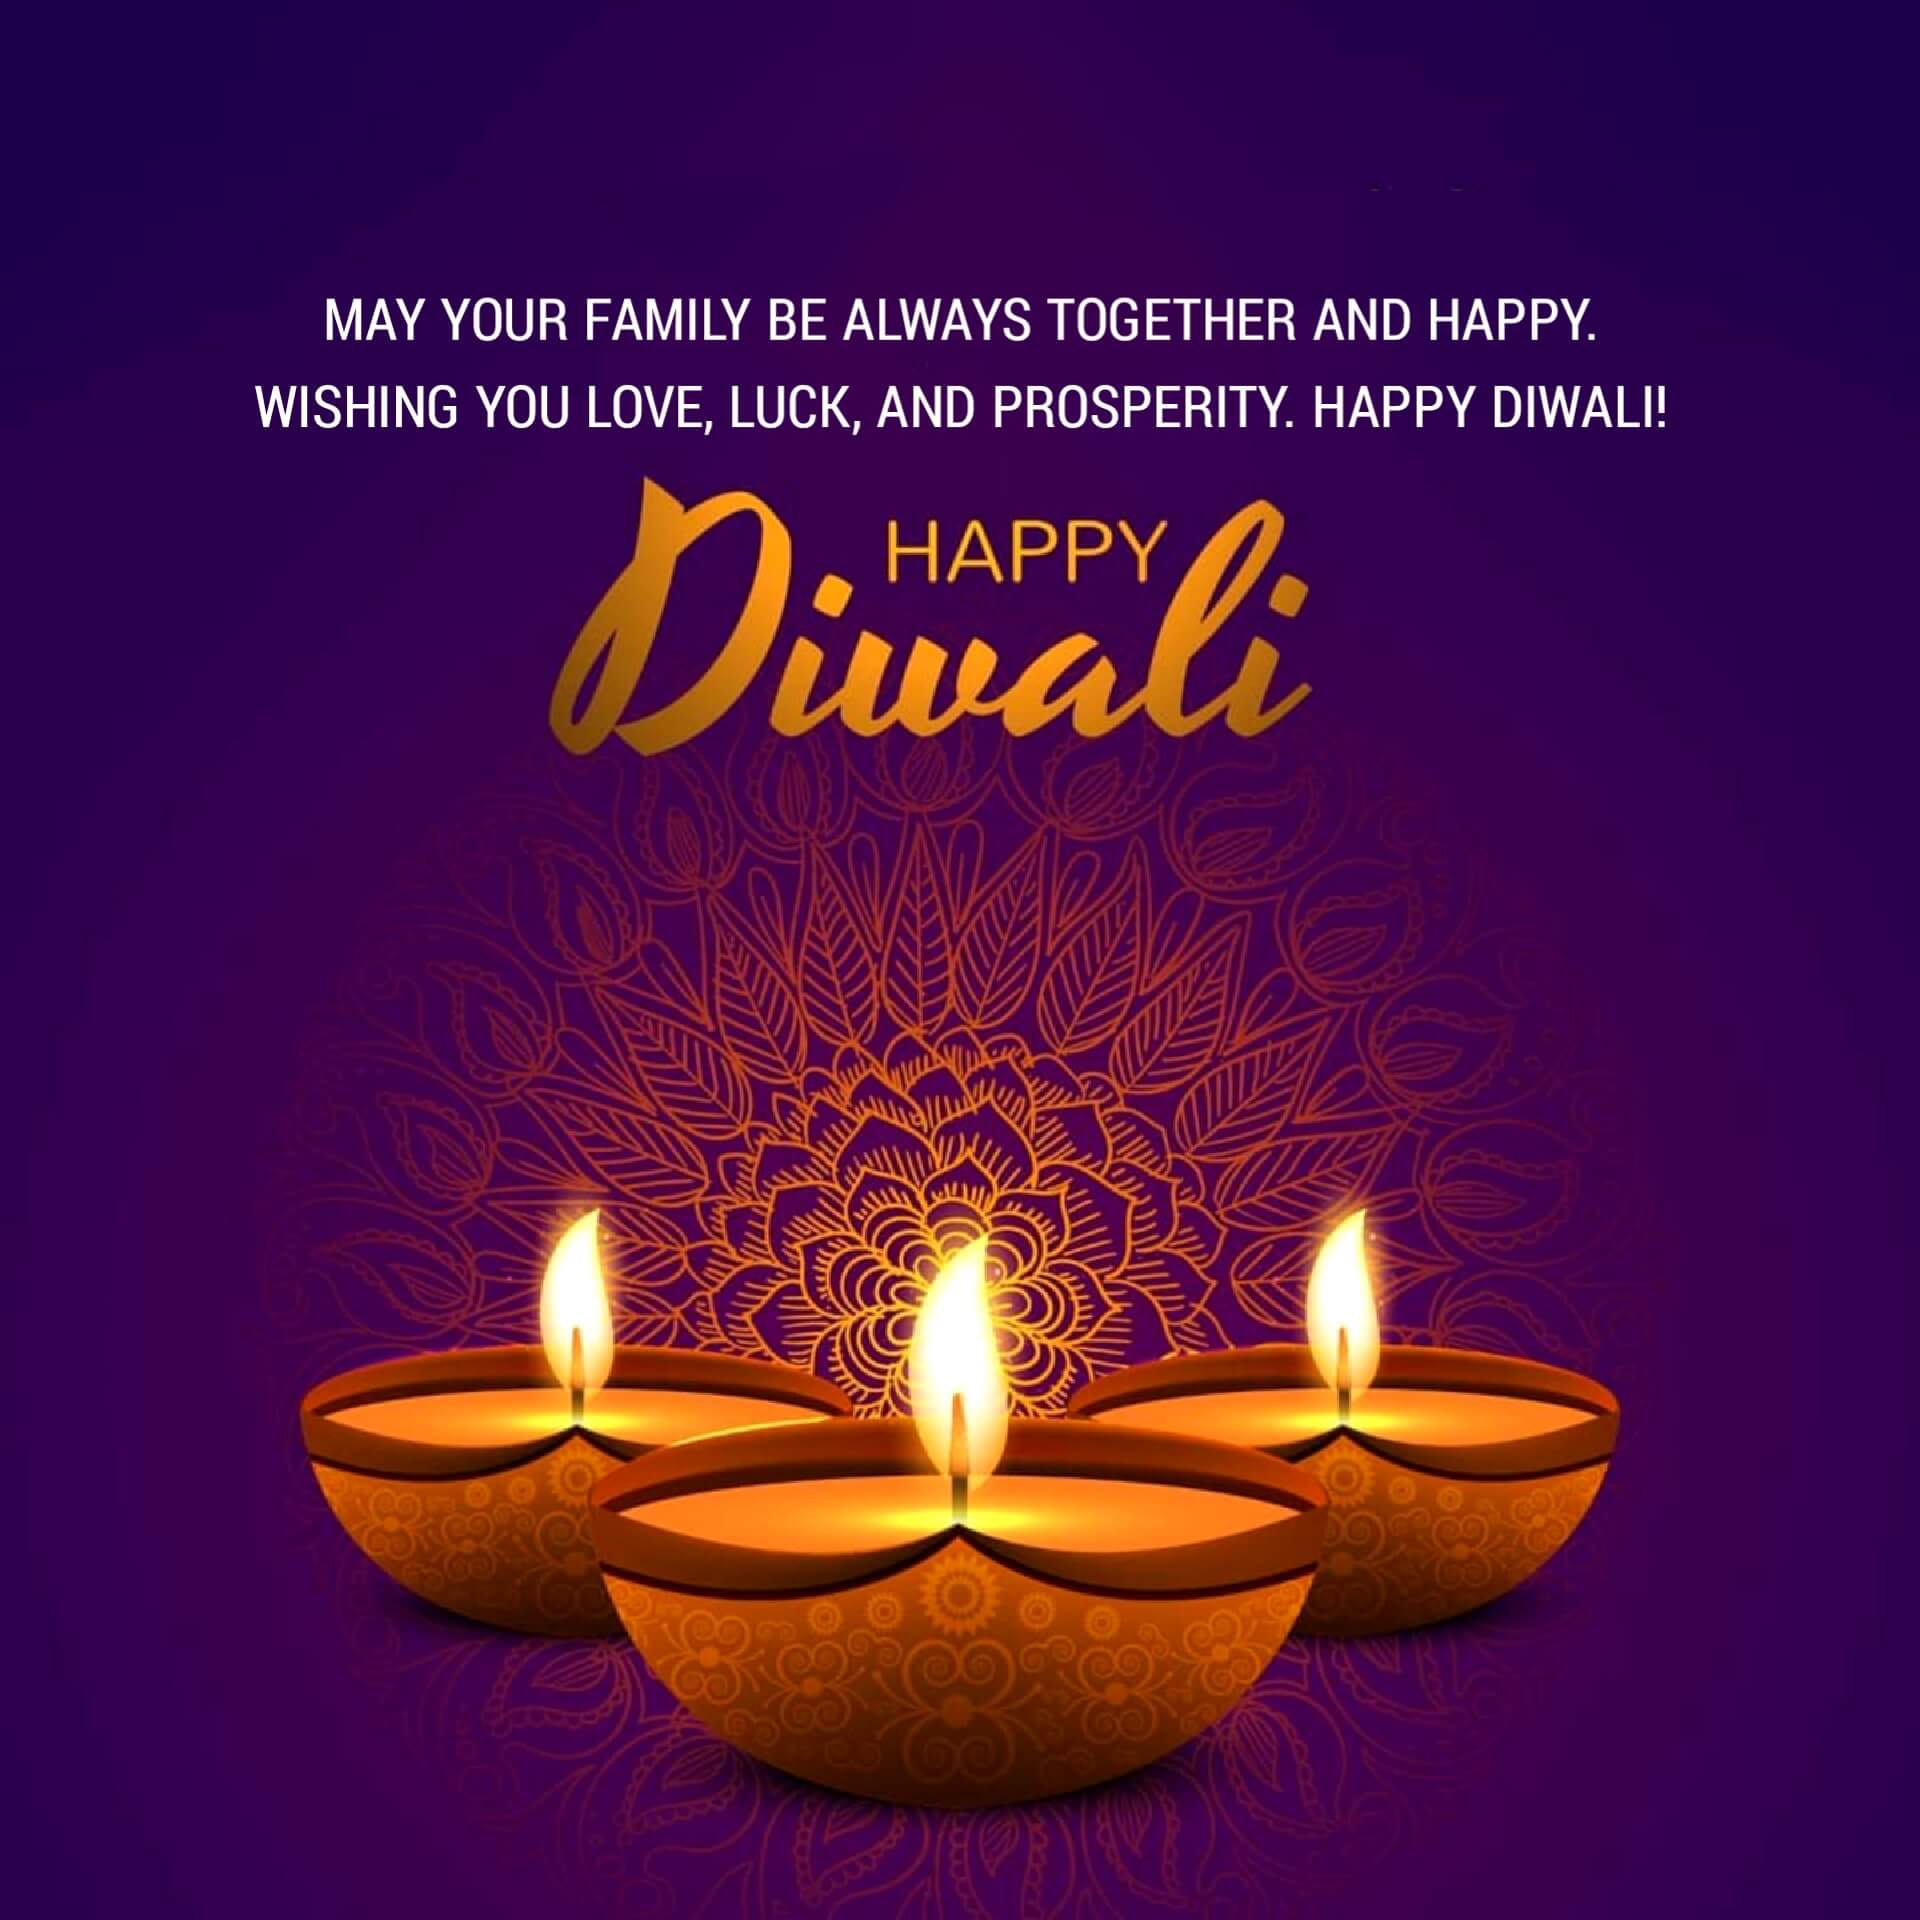 Happy diwali wishes images